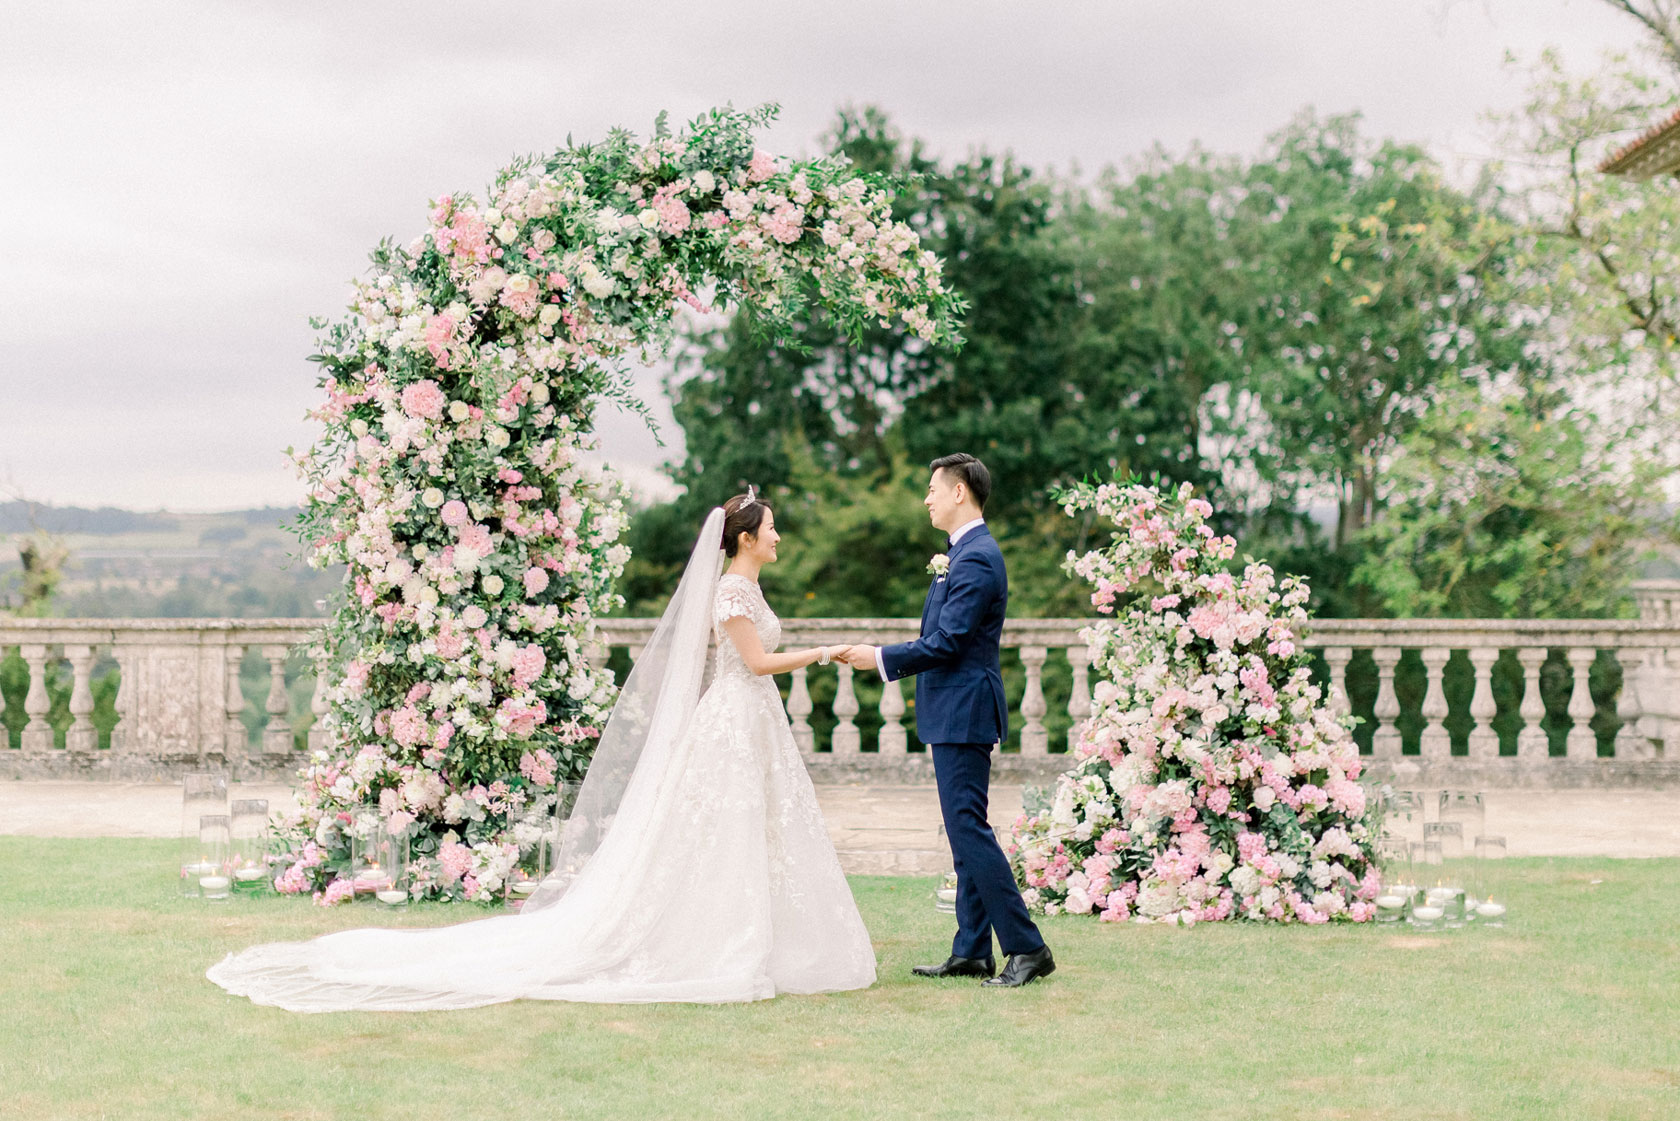 a candlelit wedding in a marquee with hanging florals